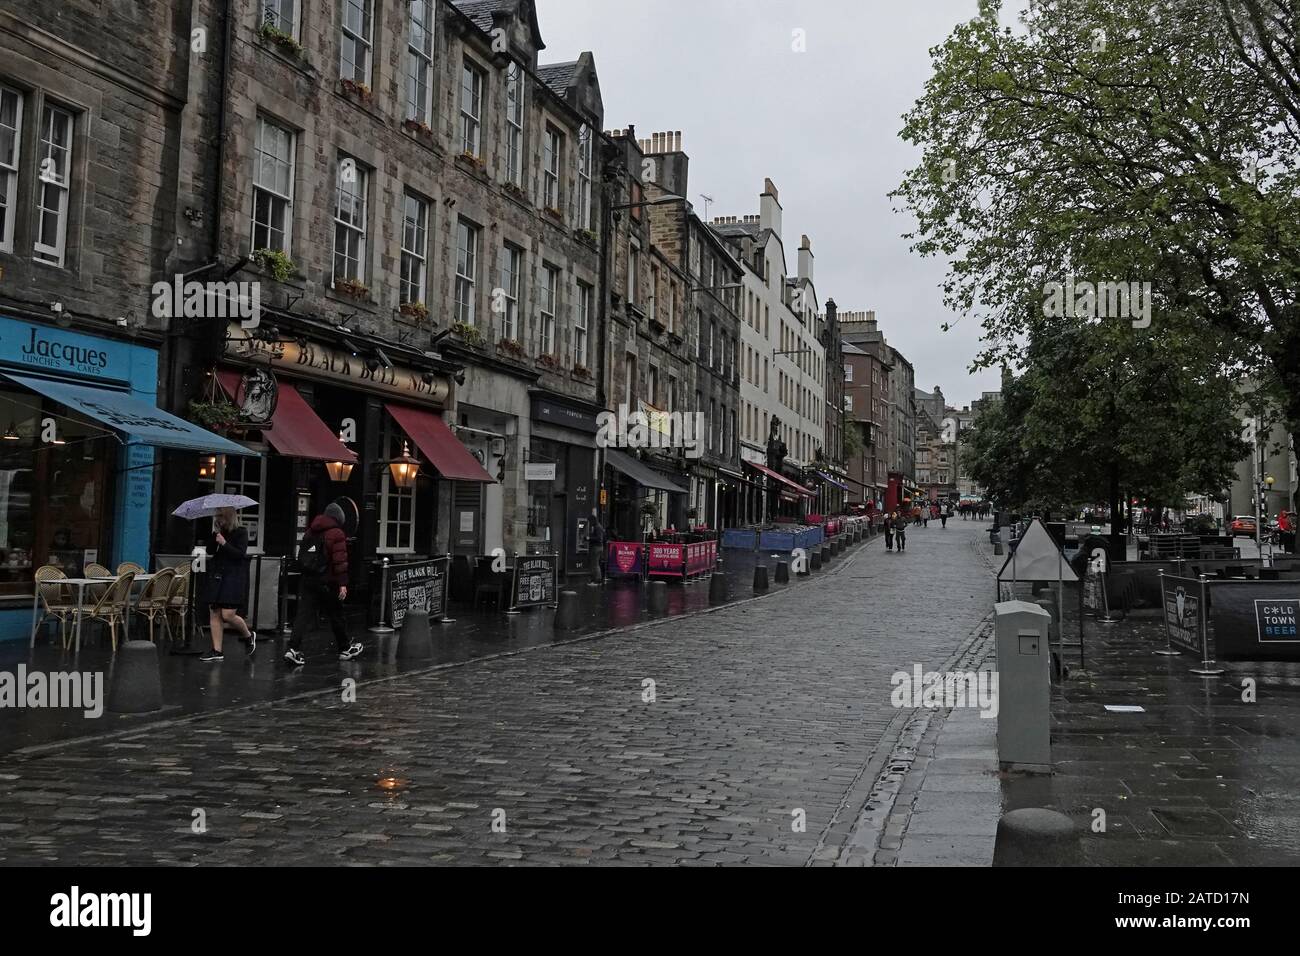 Edinburgh, Scotland / UK - June 12, 2019: Pubs and shops along the Grassmarket district are shown during a rainy day. For editorial uses only. Stock Photo